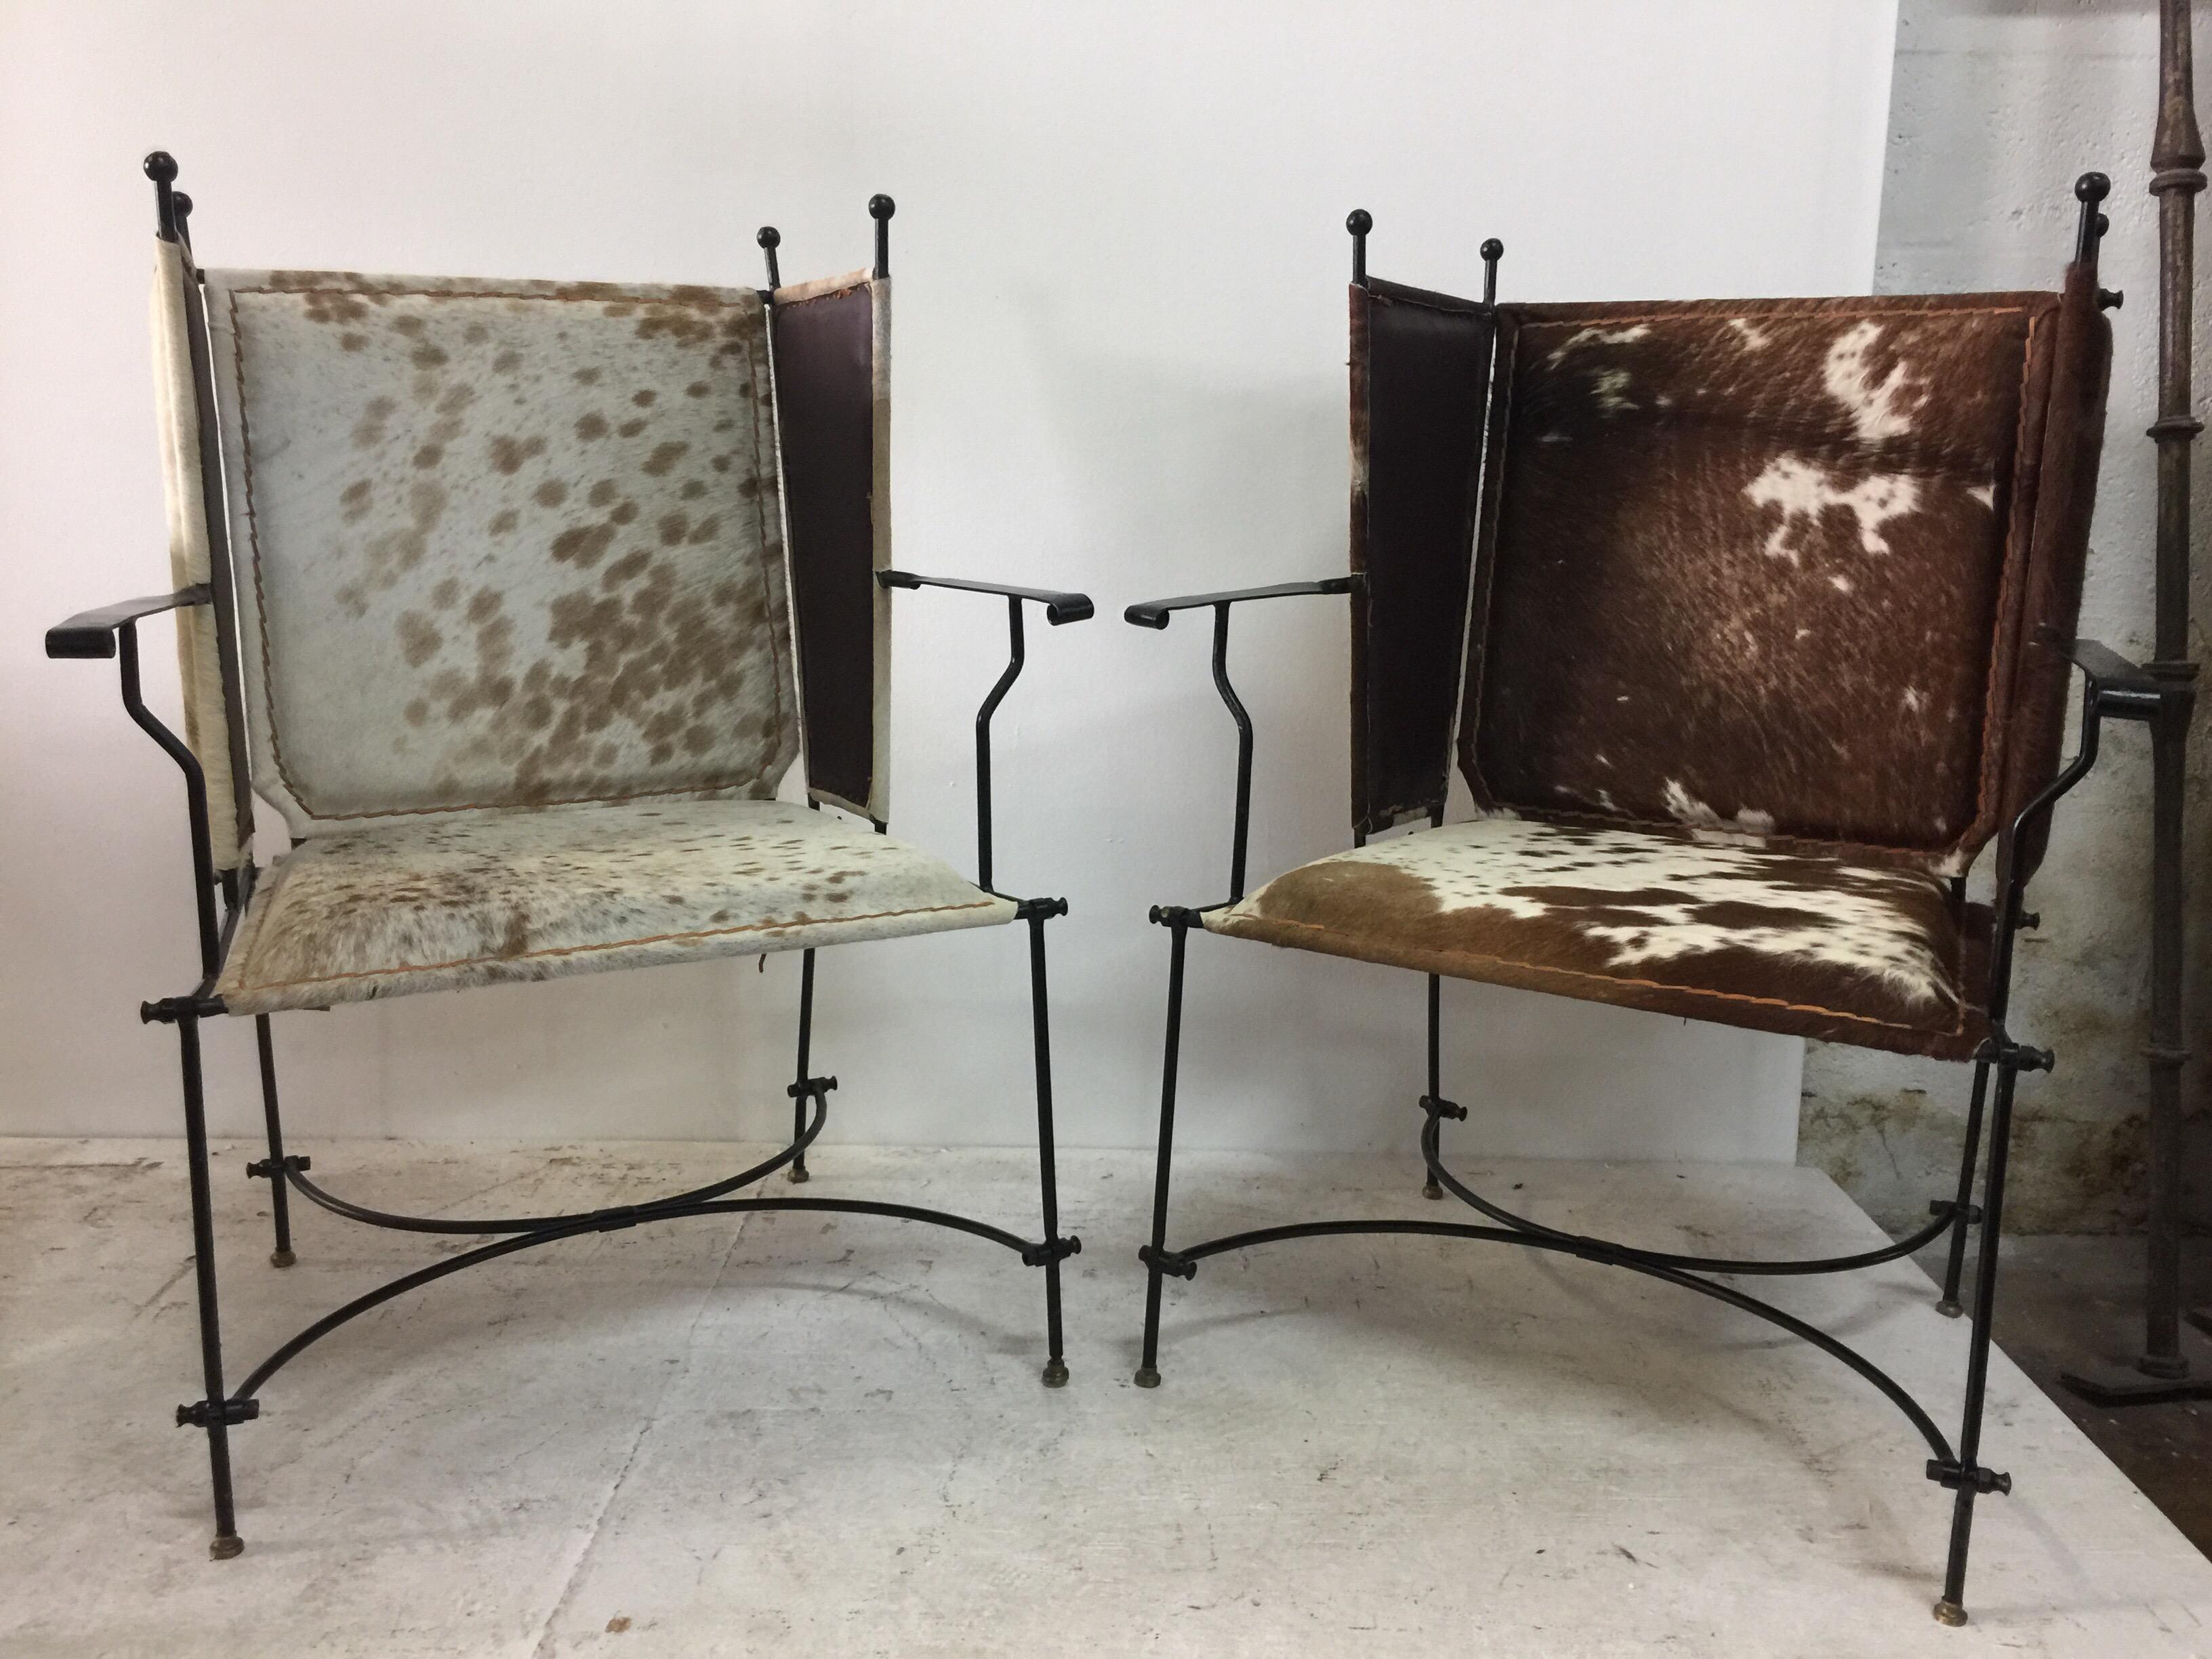 These natural pony hide covered iron armchairs are solid and classically designed. Ball finials accents and very chic!